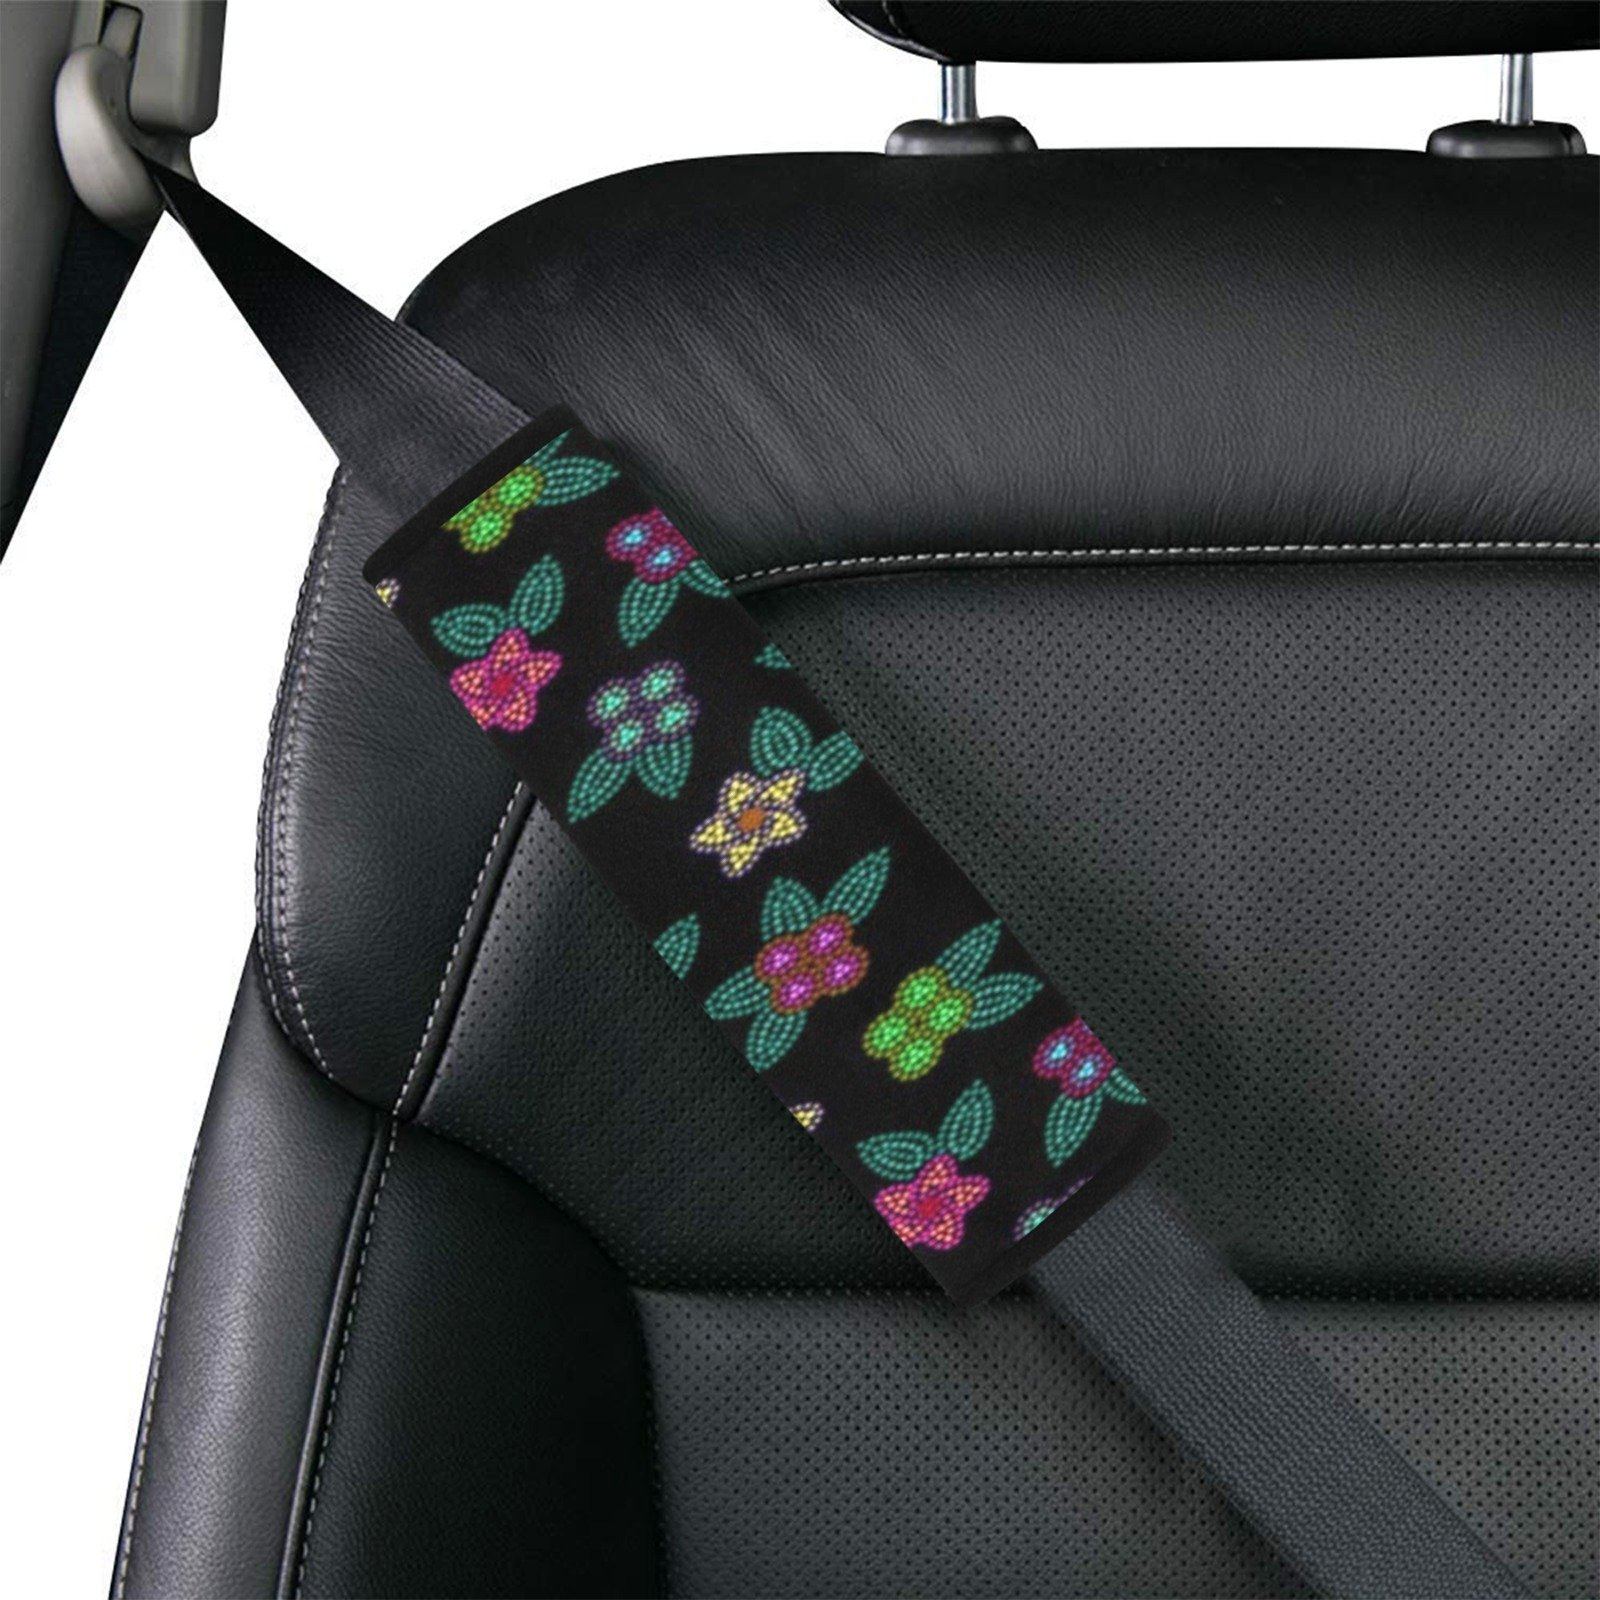 Berry Flowers Black Car Seat Belt Cover 7''x12.6'' (Pack of 2) Car Seat Belt Cover 7x12.6 (Pack of 2) e-joyer 